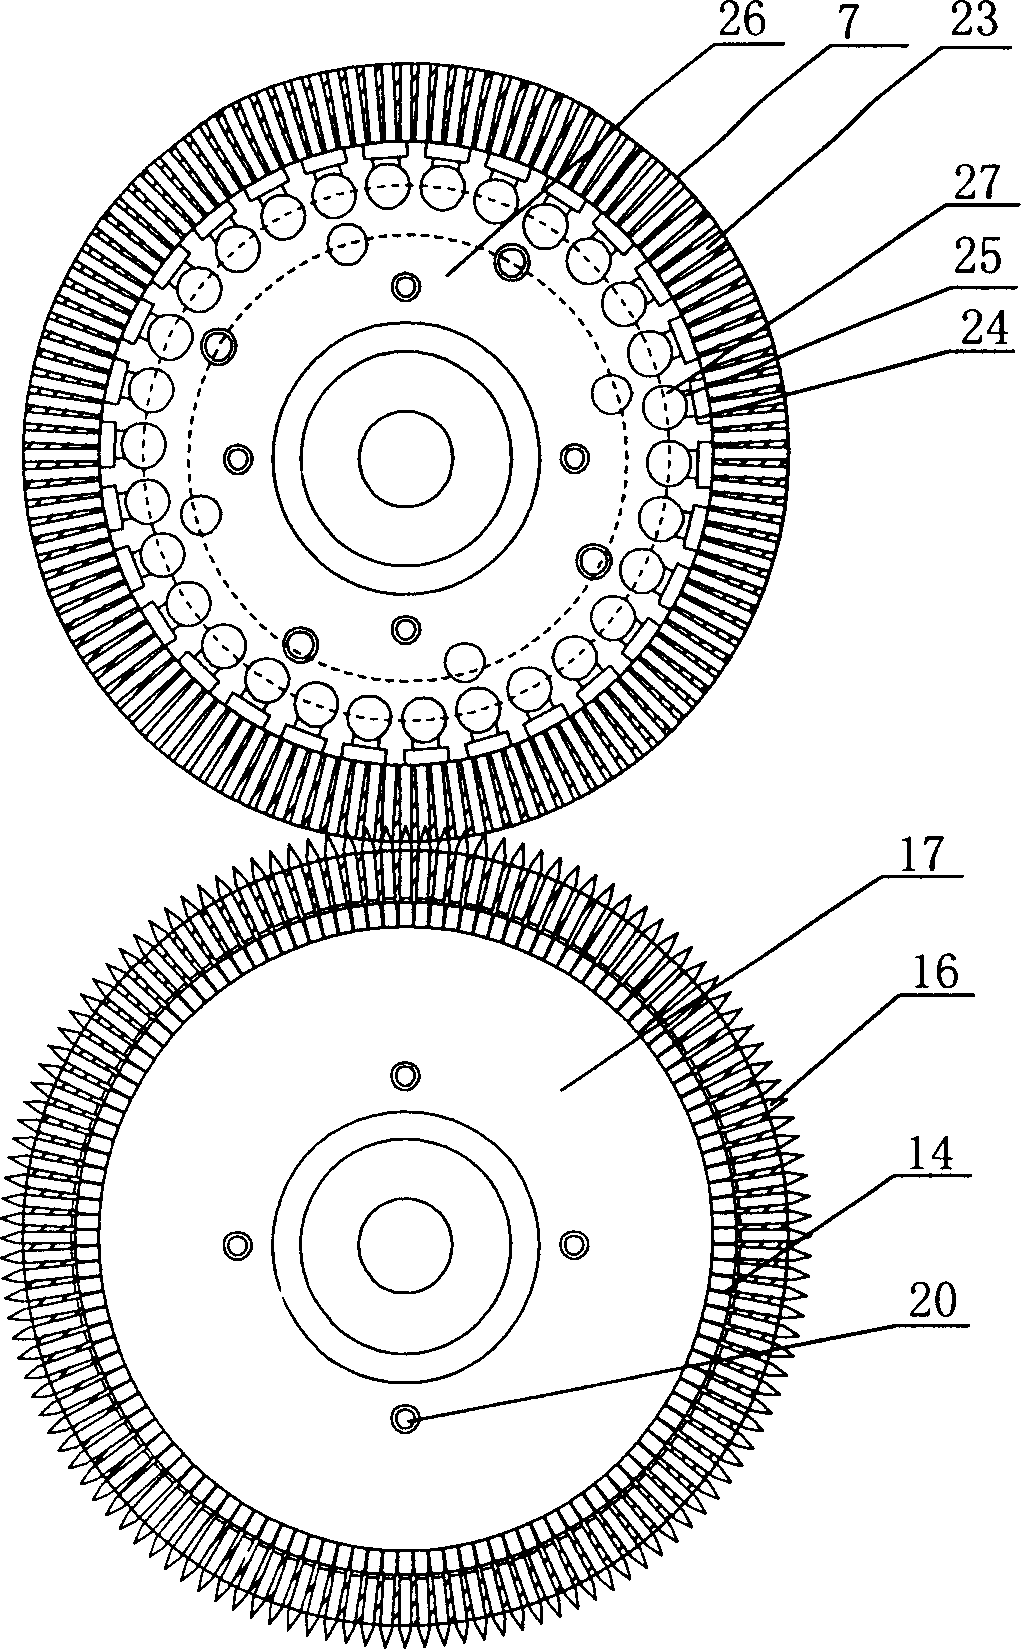 Apparatus for perforating surface of sanitary articals